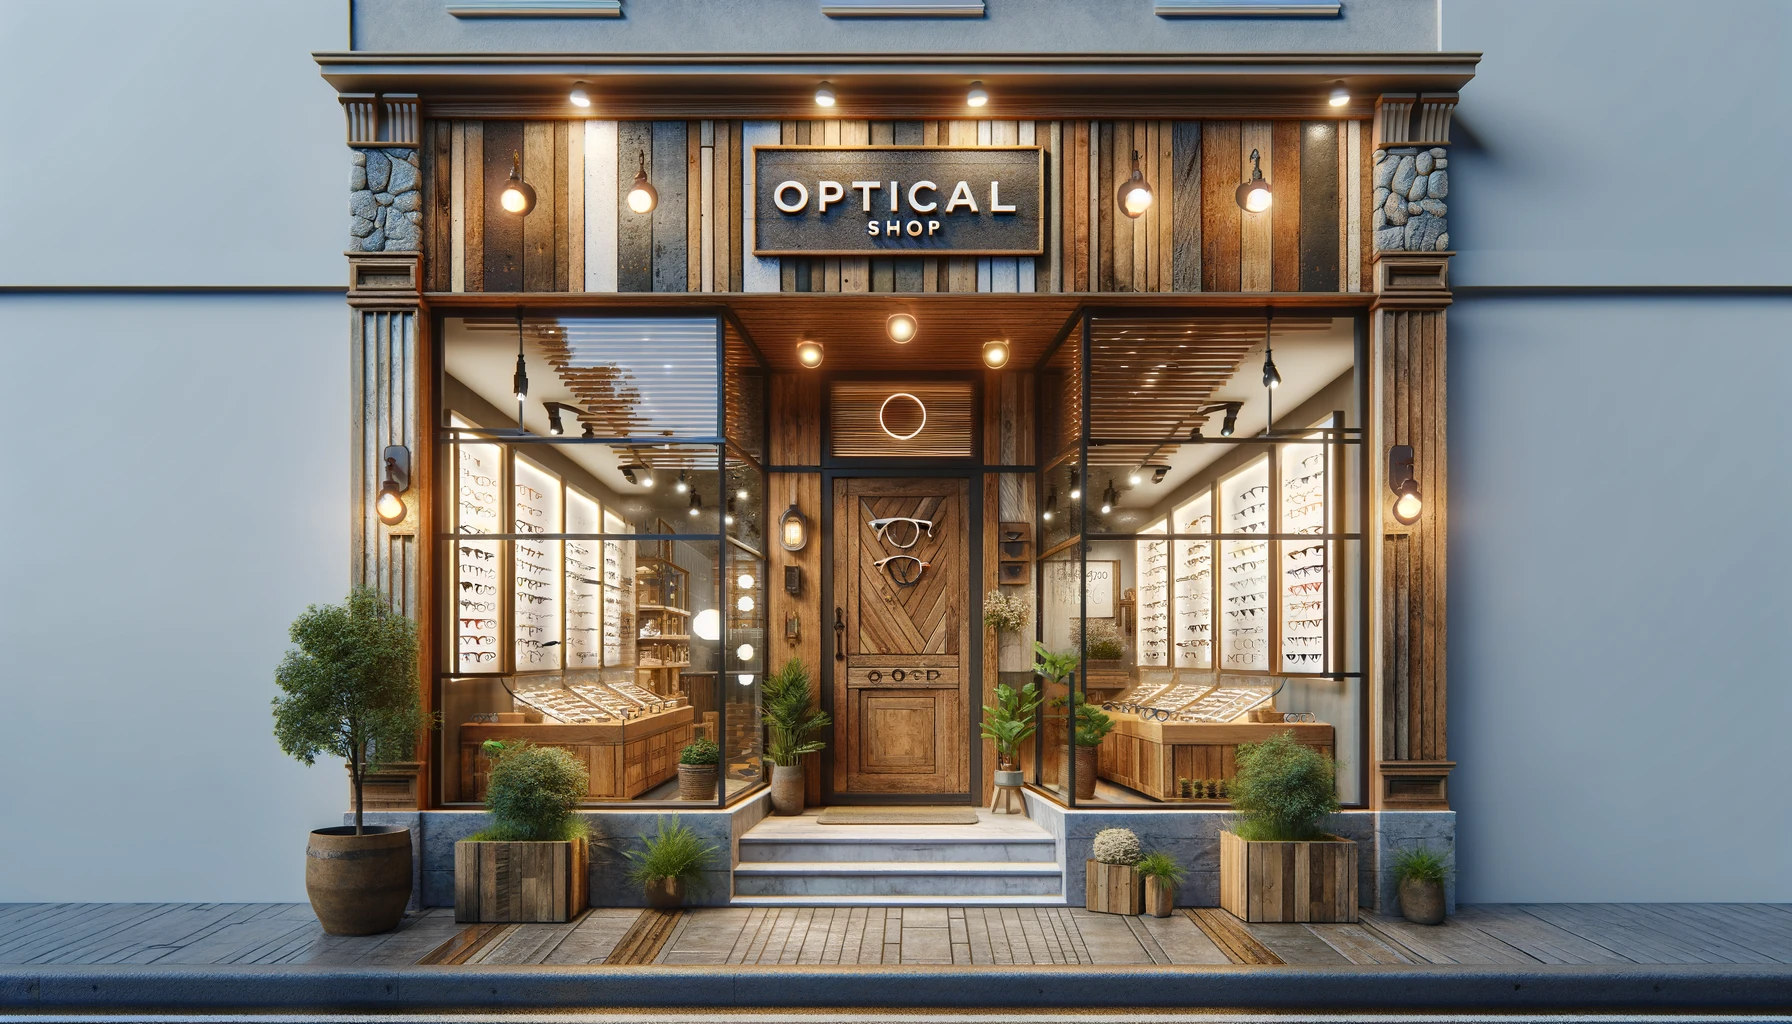 traditional optical shop front design